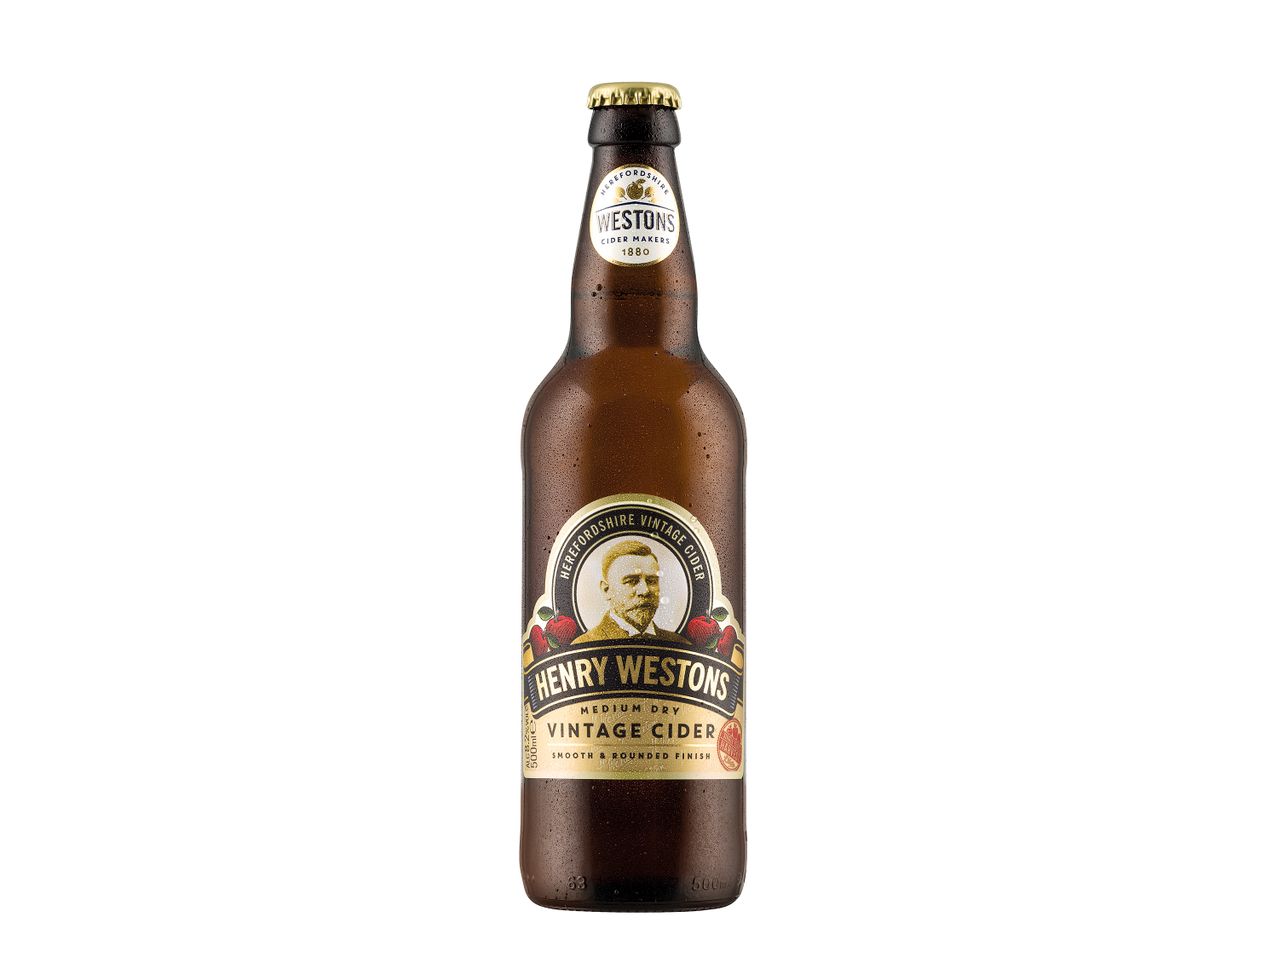 Go to full screen view: Henry Westons Vintage Cider - Image 1